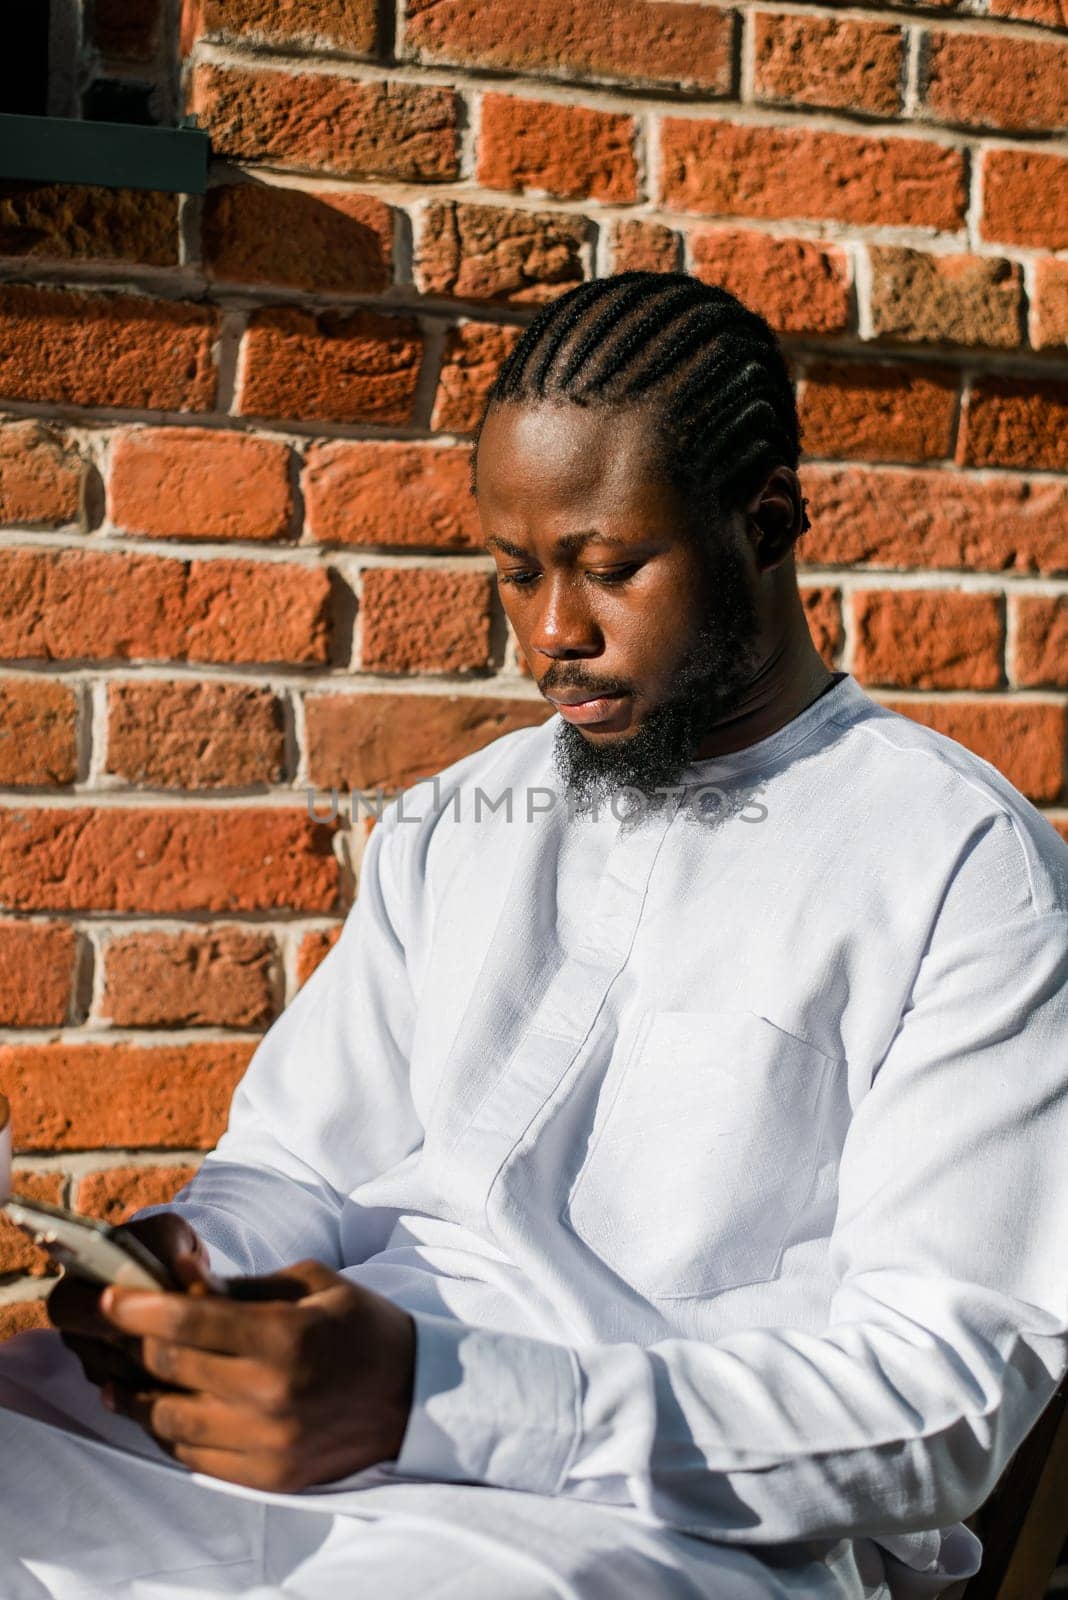 Millennial generation african american man typing sms outdoor 5g internet concept. High speed internet on phone and chatting on social networks and blog